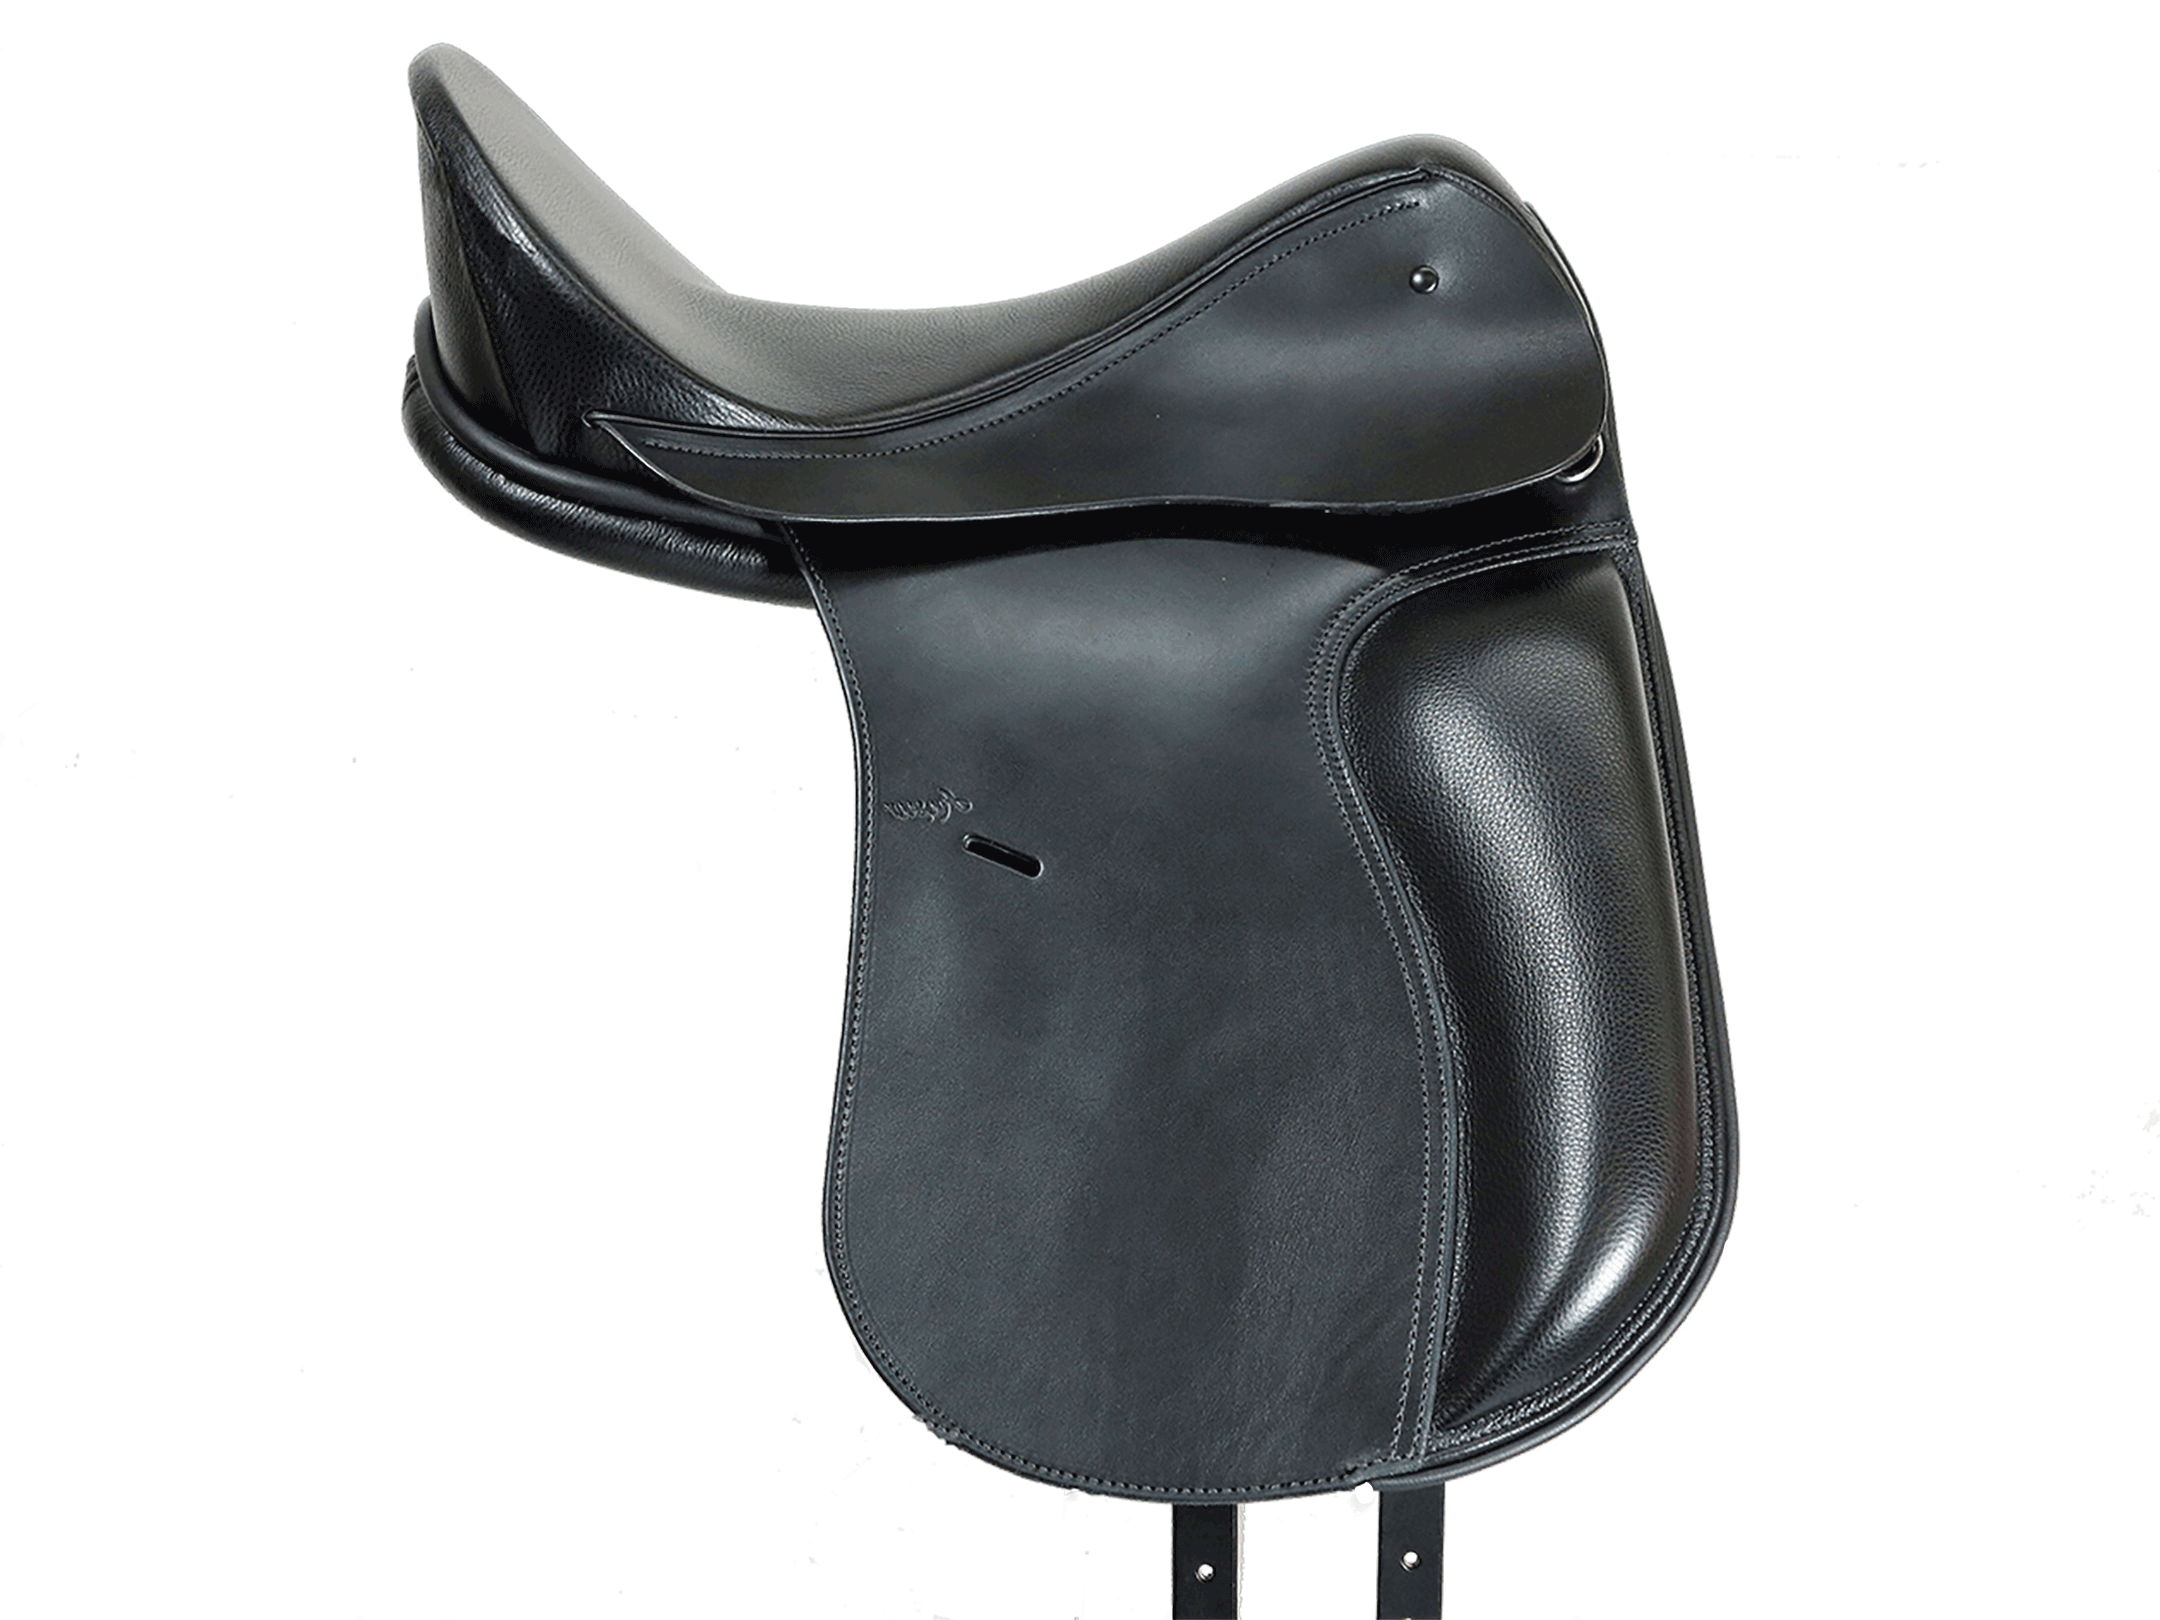 Black Available in 5 Size" With Accessories Dressage Treeless Saddle 